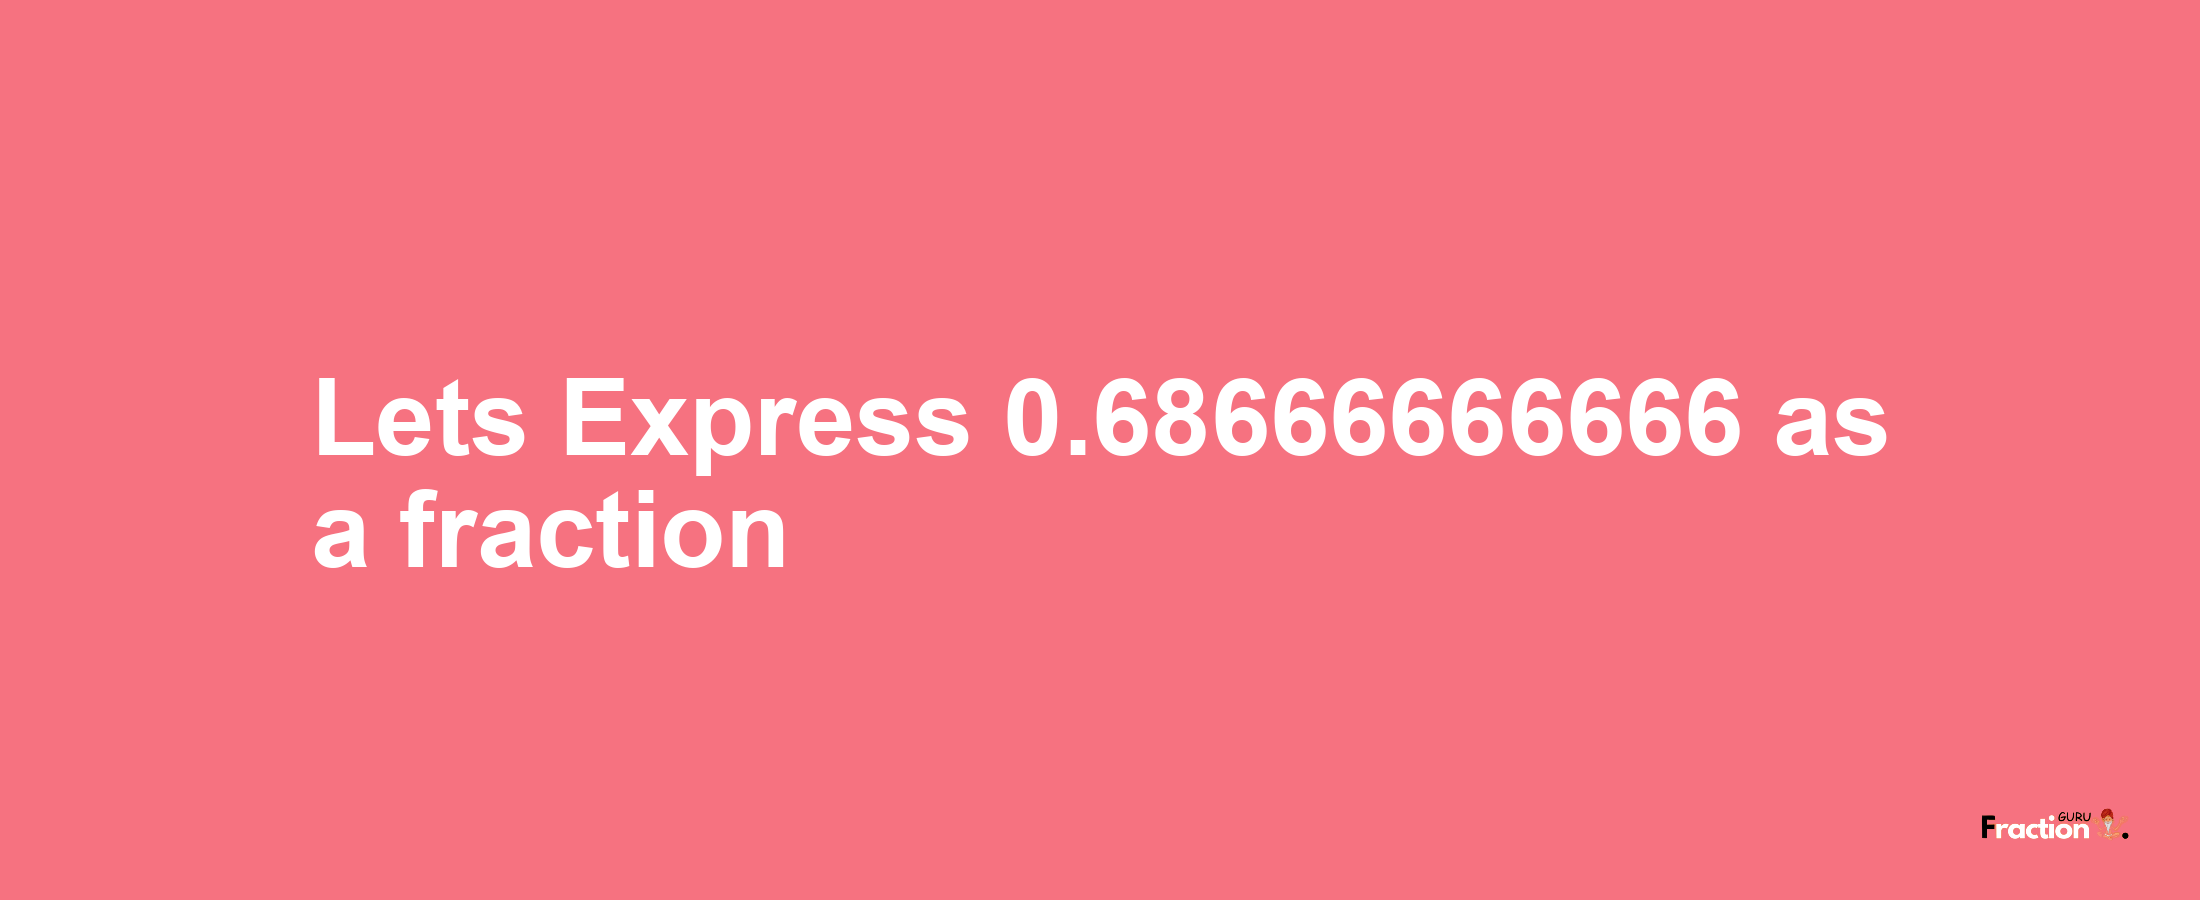 Lets Express 0.68666666666 as afraction